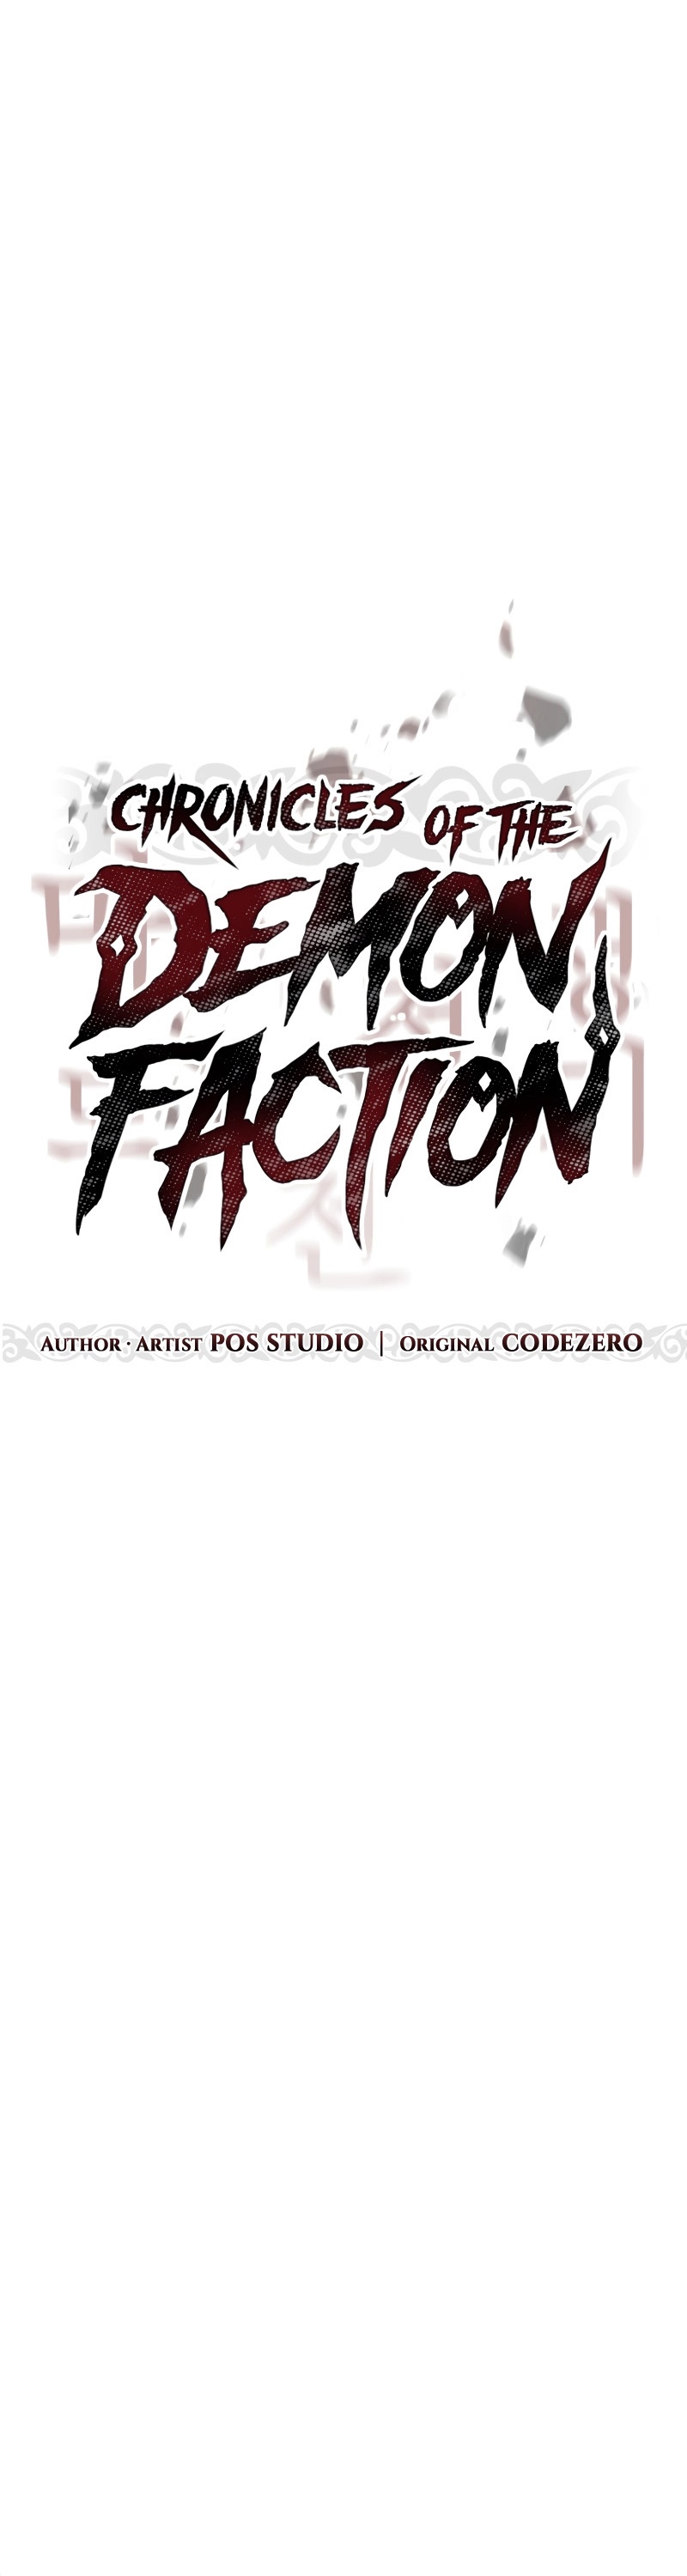 Chronicles of the Demon Faction 69 (13)